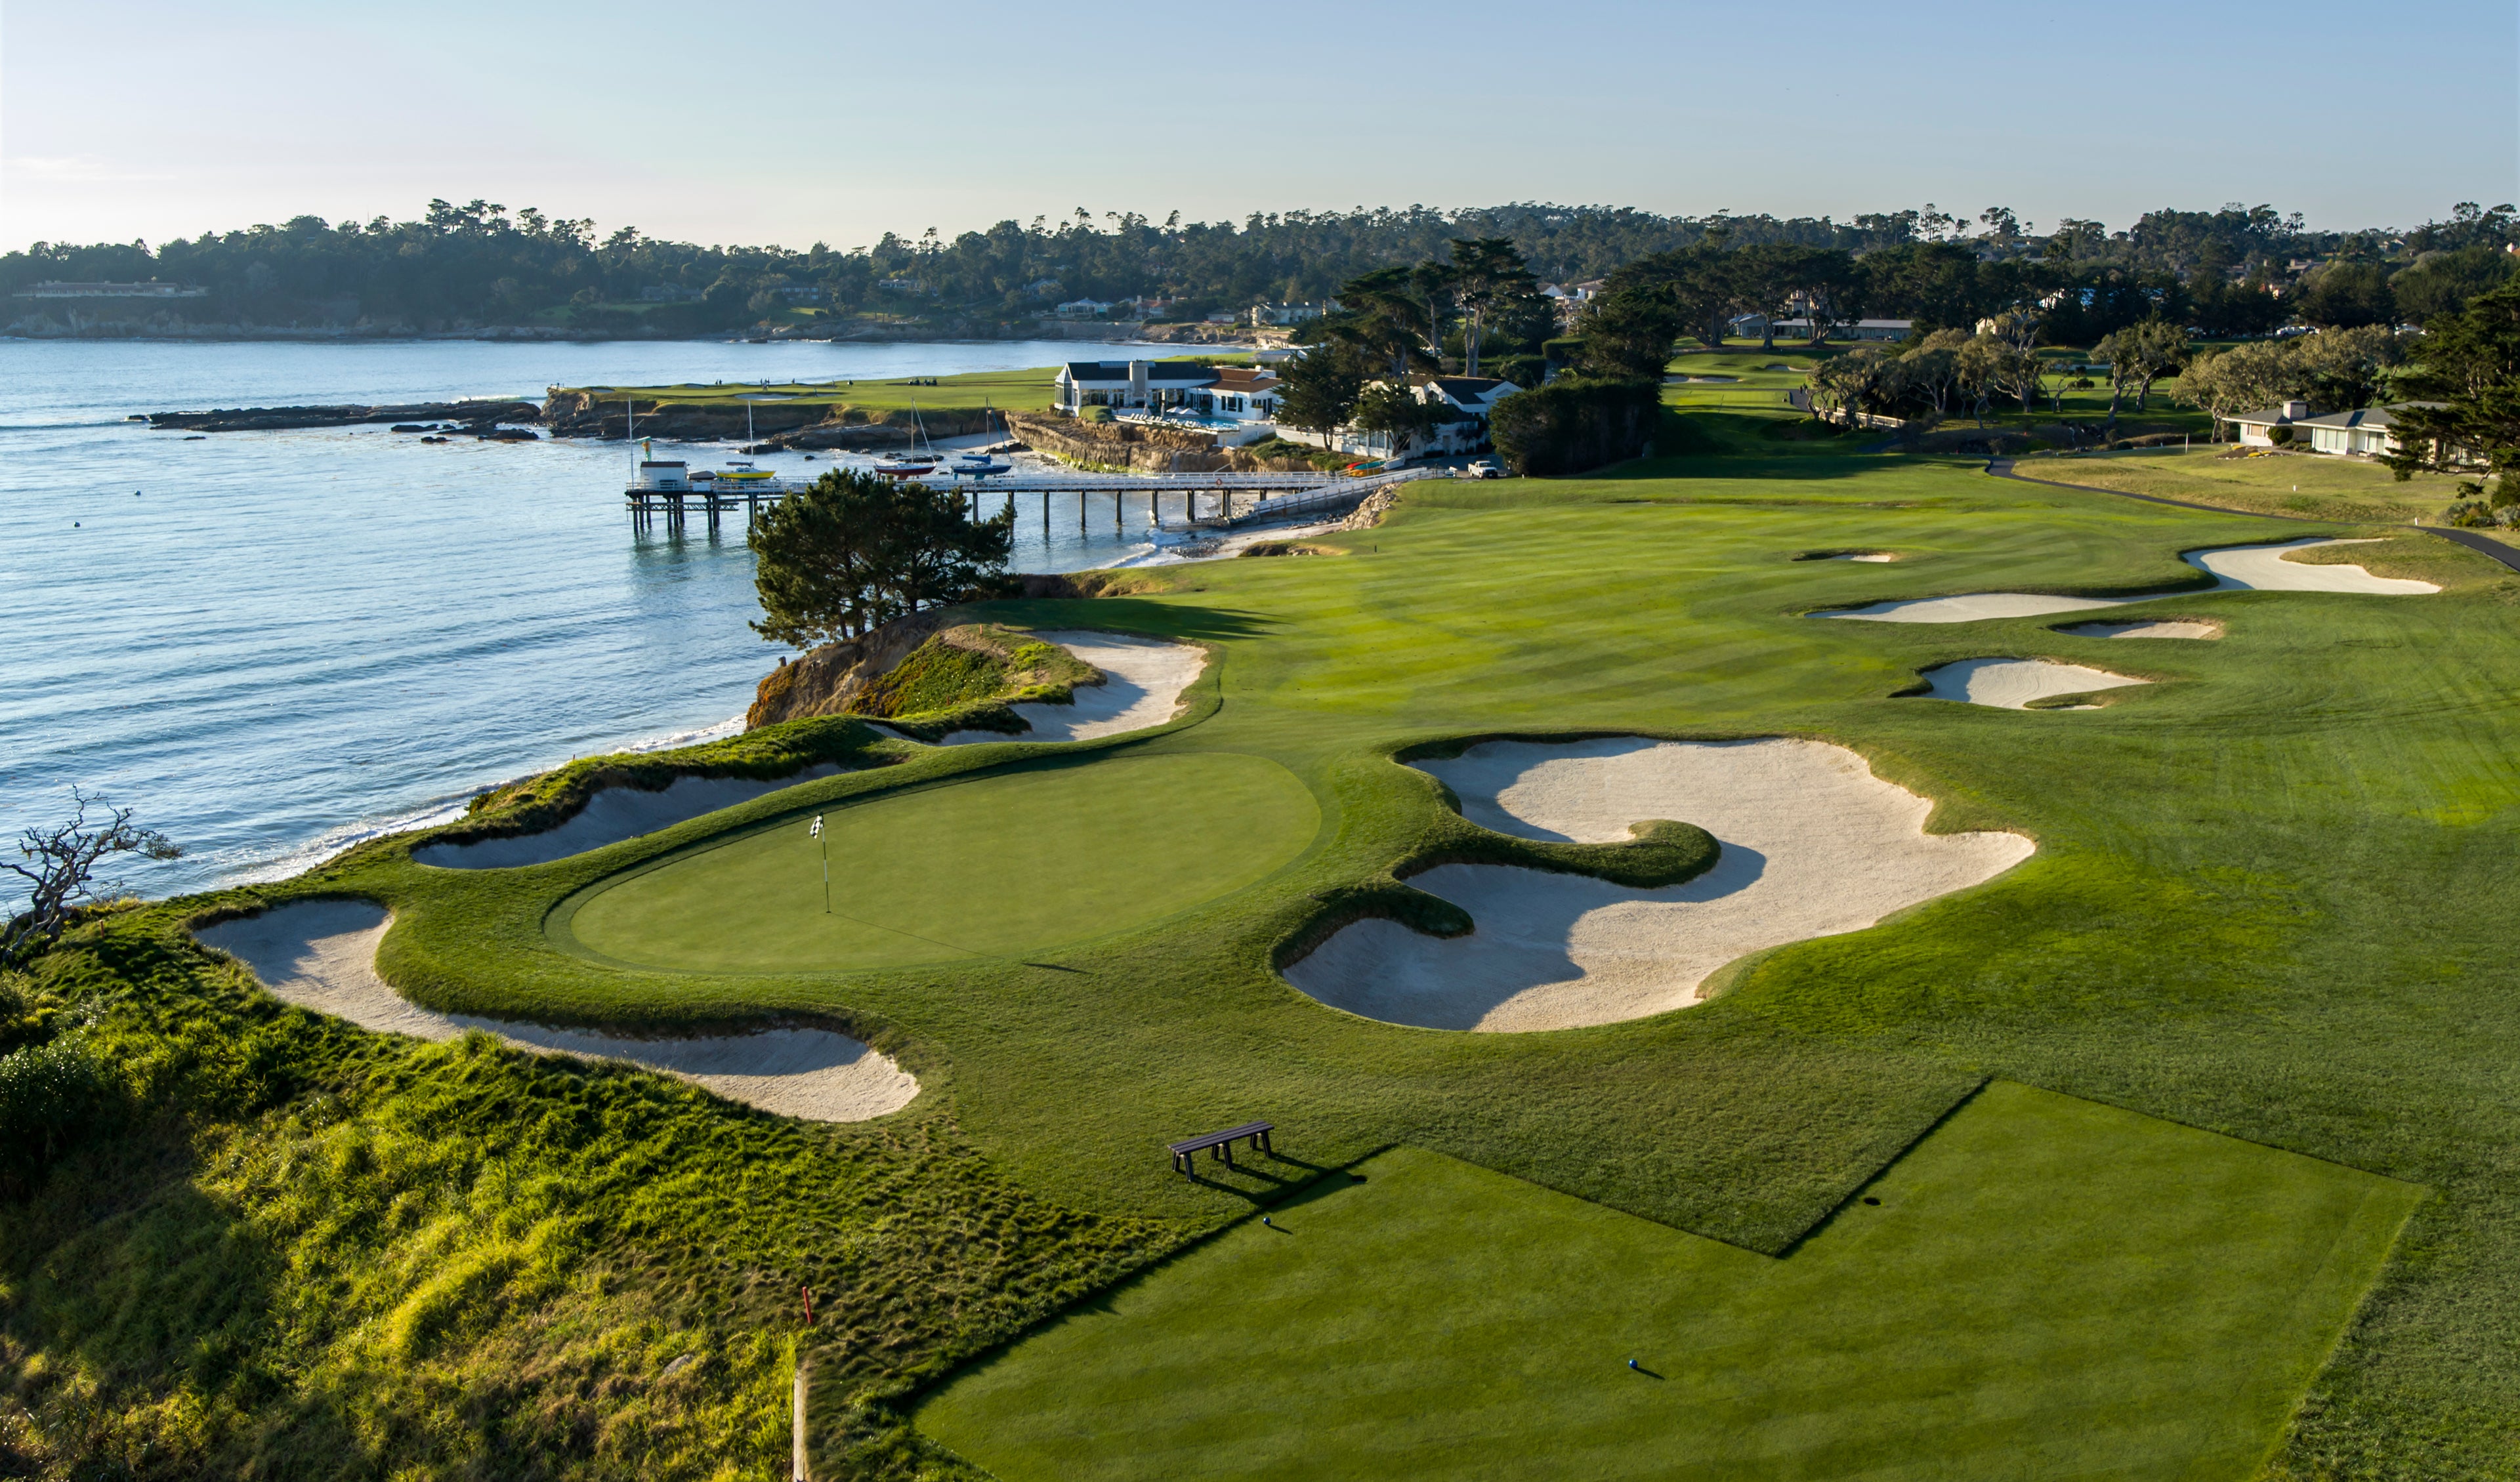 Pebble Beach golf course overlooking the oceans with perfectly manicured green grass and sand traps